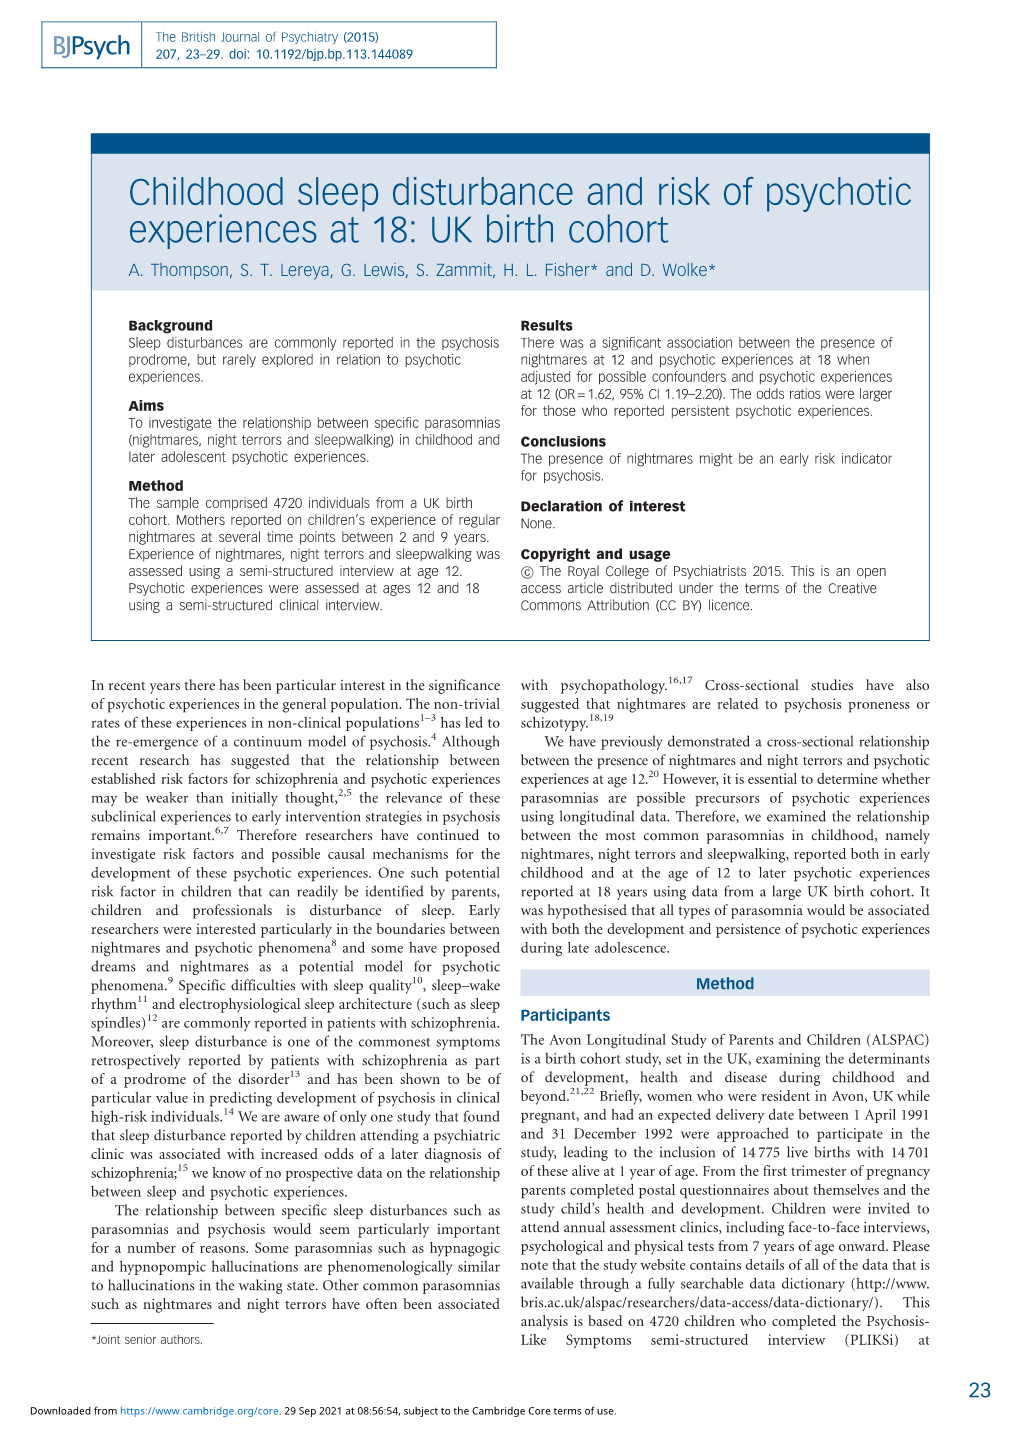 Childhood Sleep Disturbance and Risk of Psychotic Experiences at 18: UK Birth Cohort A